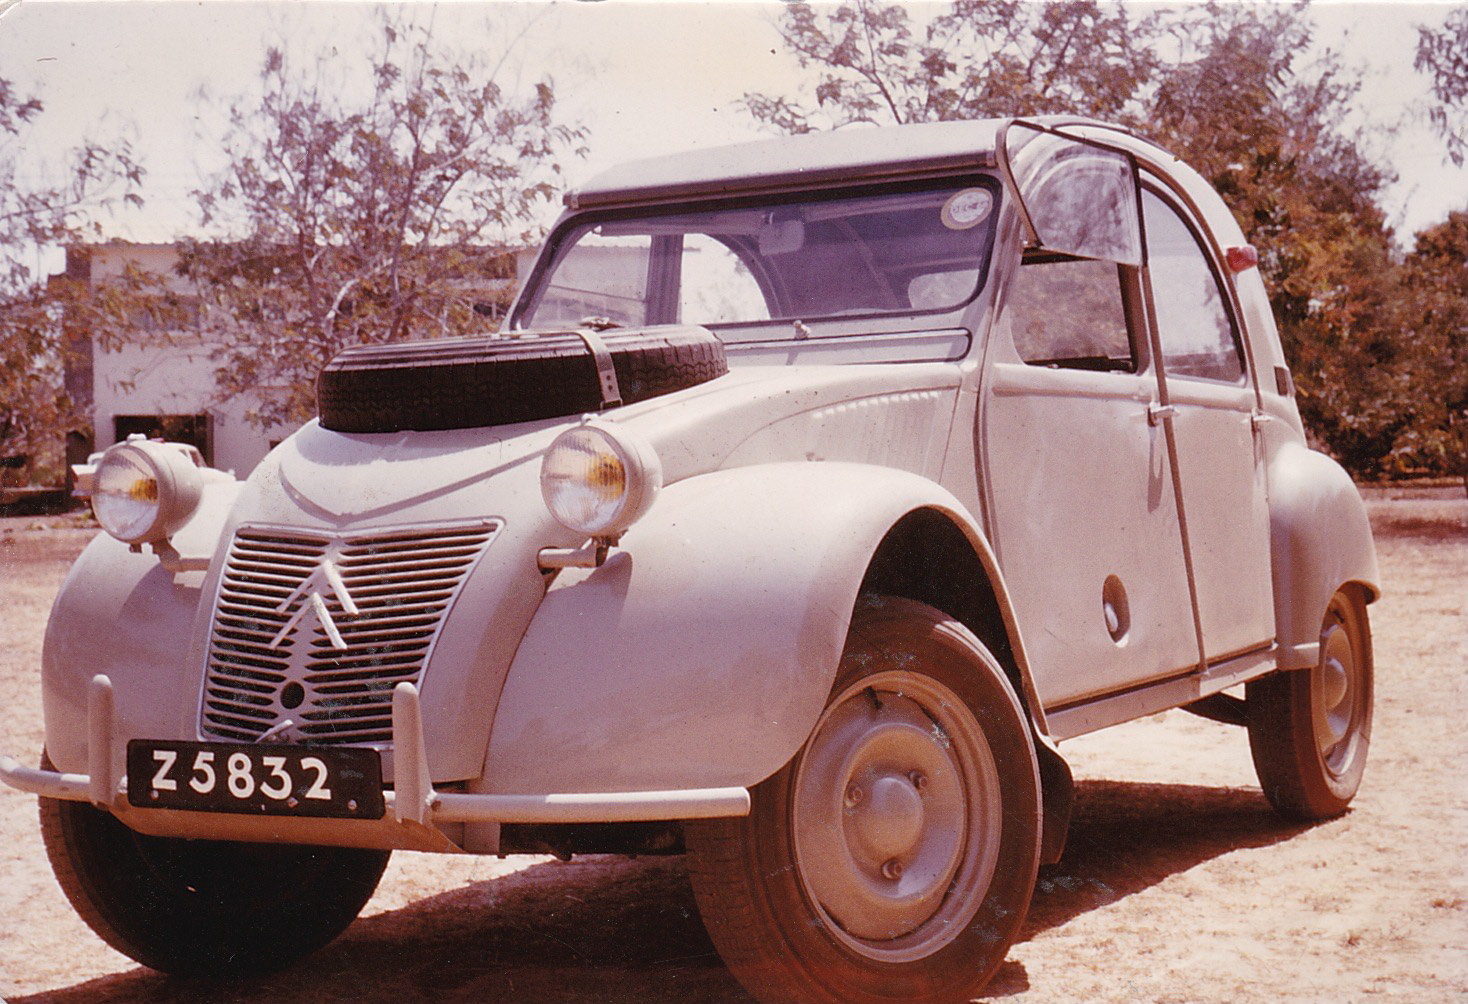 This low-mileage Citroën 2CV Sahara is the barn find of our dreams